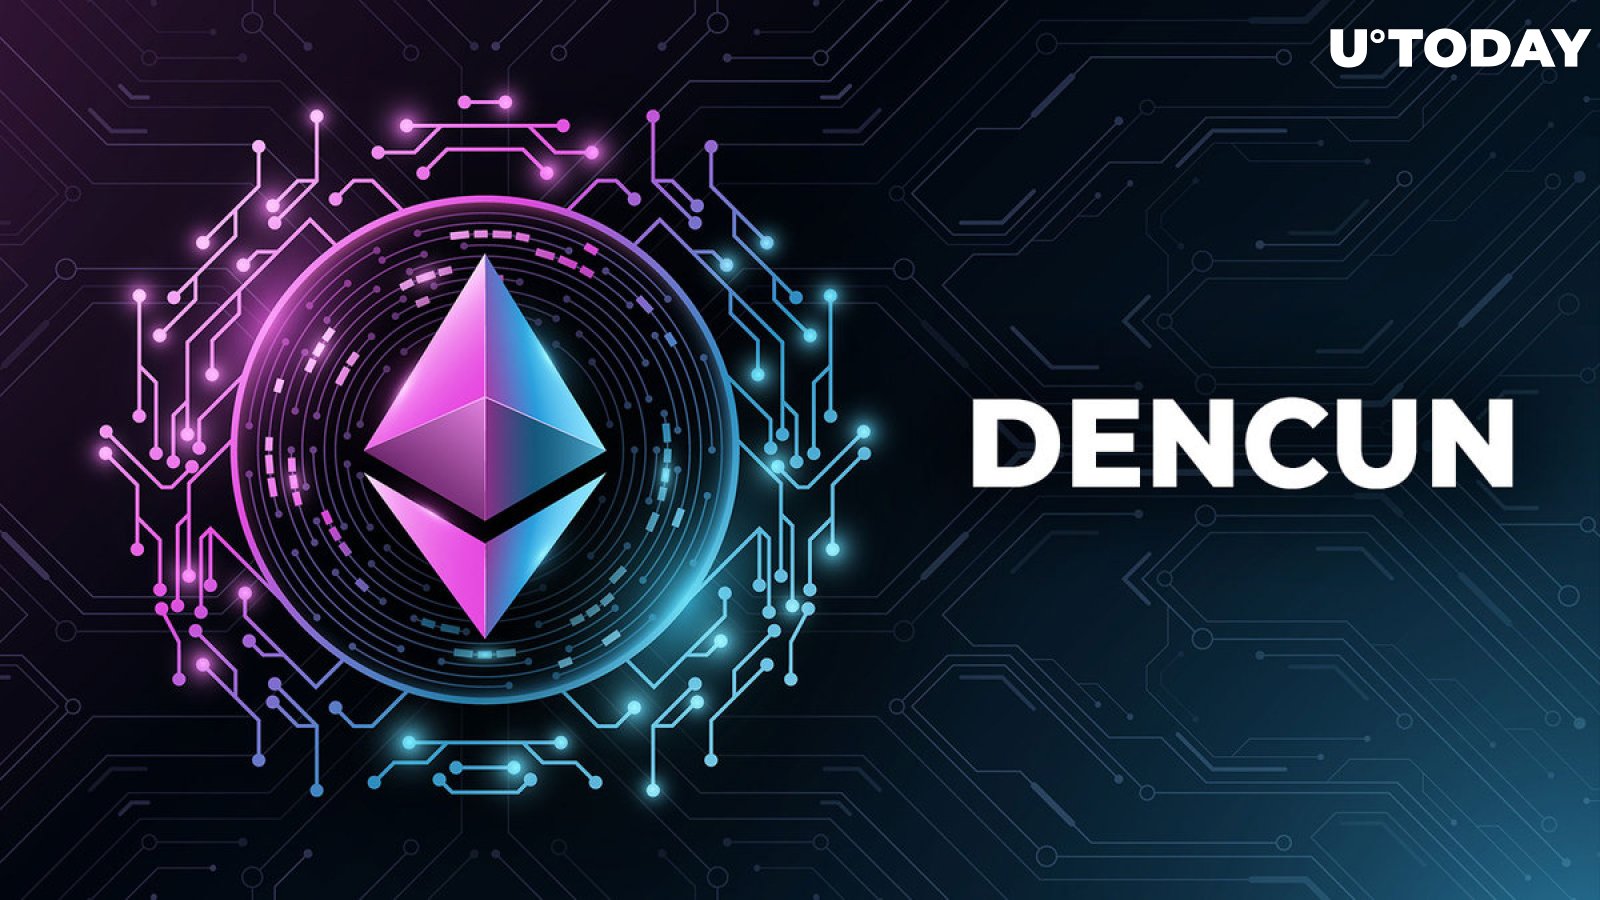 15,000 ETH Moved Suddenly as Ethereum Dencun Upgrade Activates